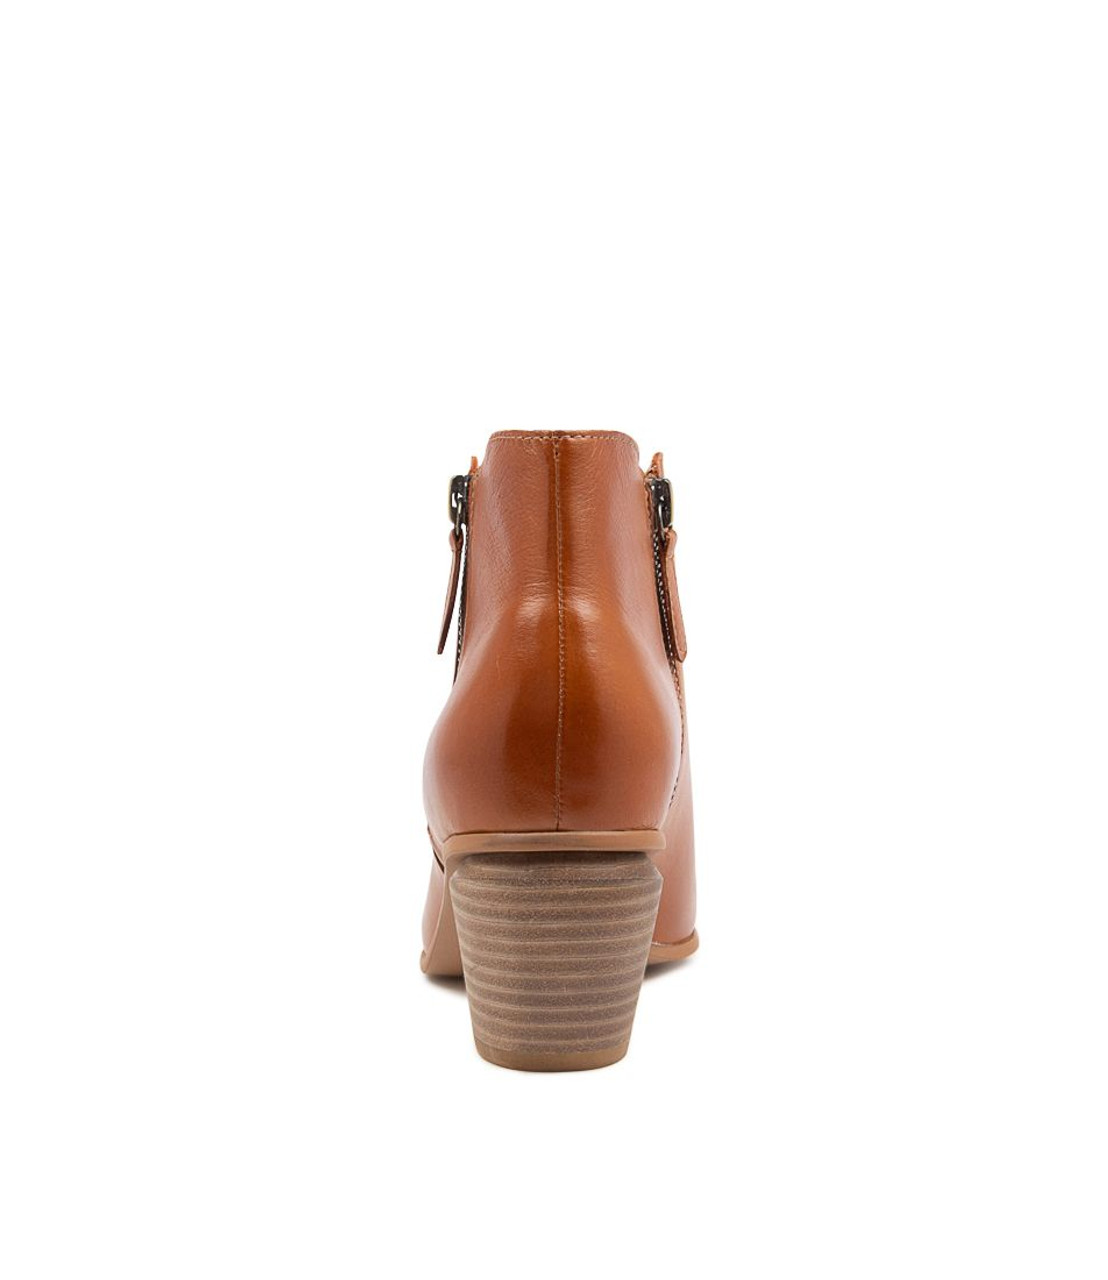 ASOS DESIGN Wide Fit Restore leather mid-heel boots in tan patent | ASOS